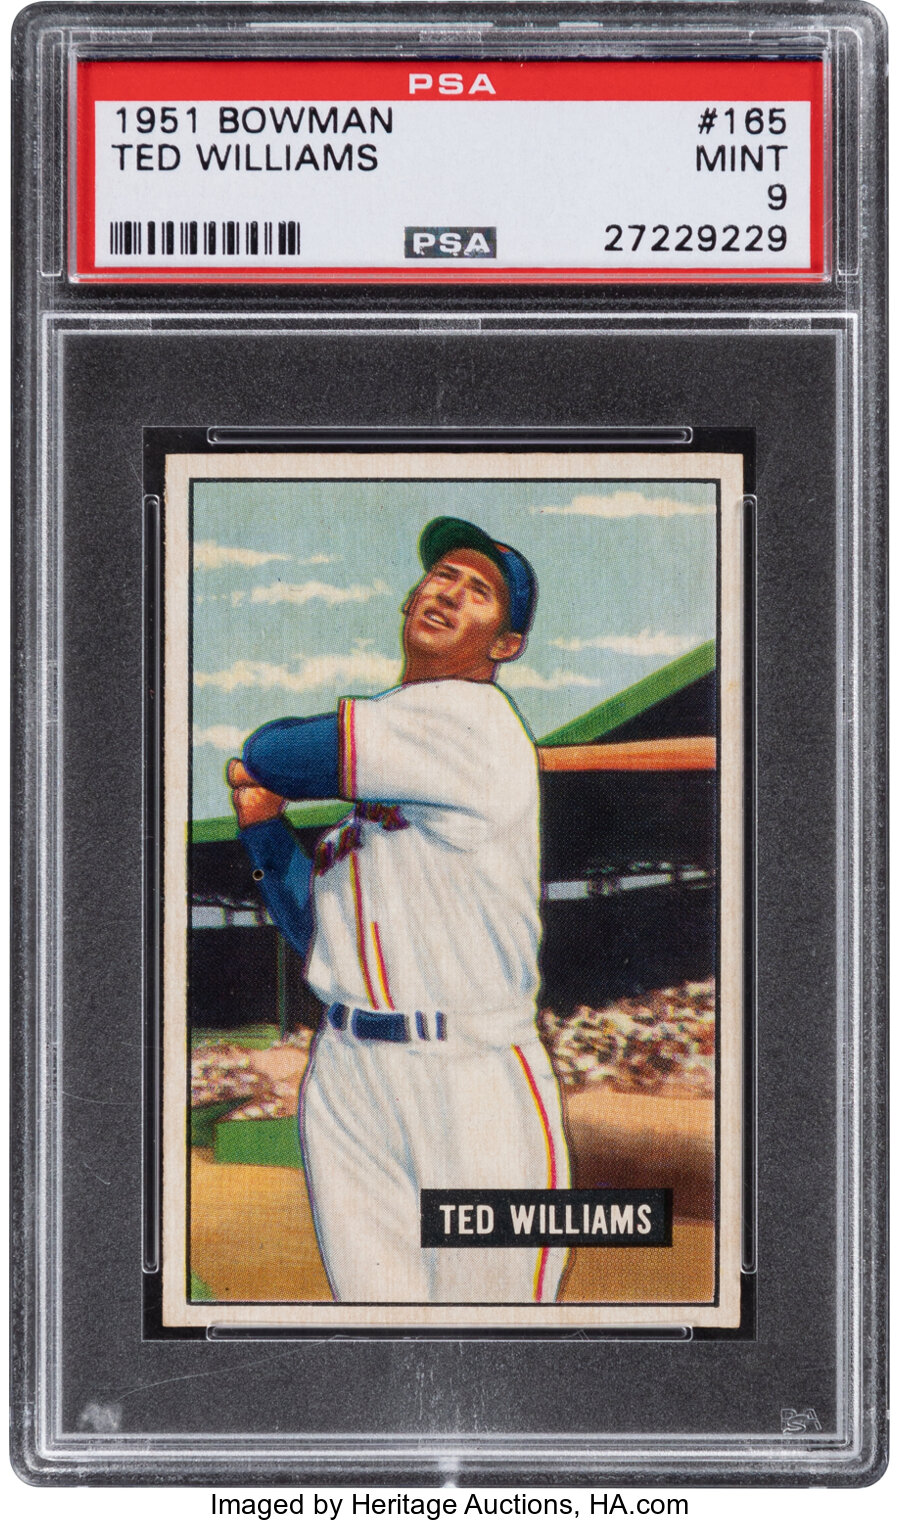 1951 Bowman Ted Williams #165 PSA Mint 9 - None Higher